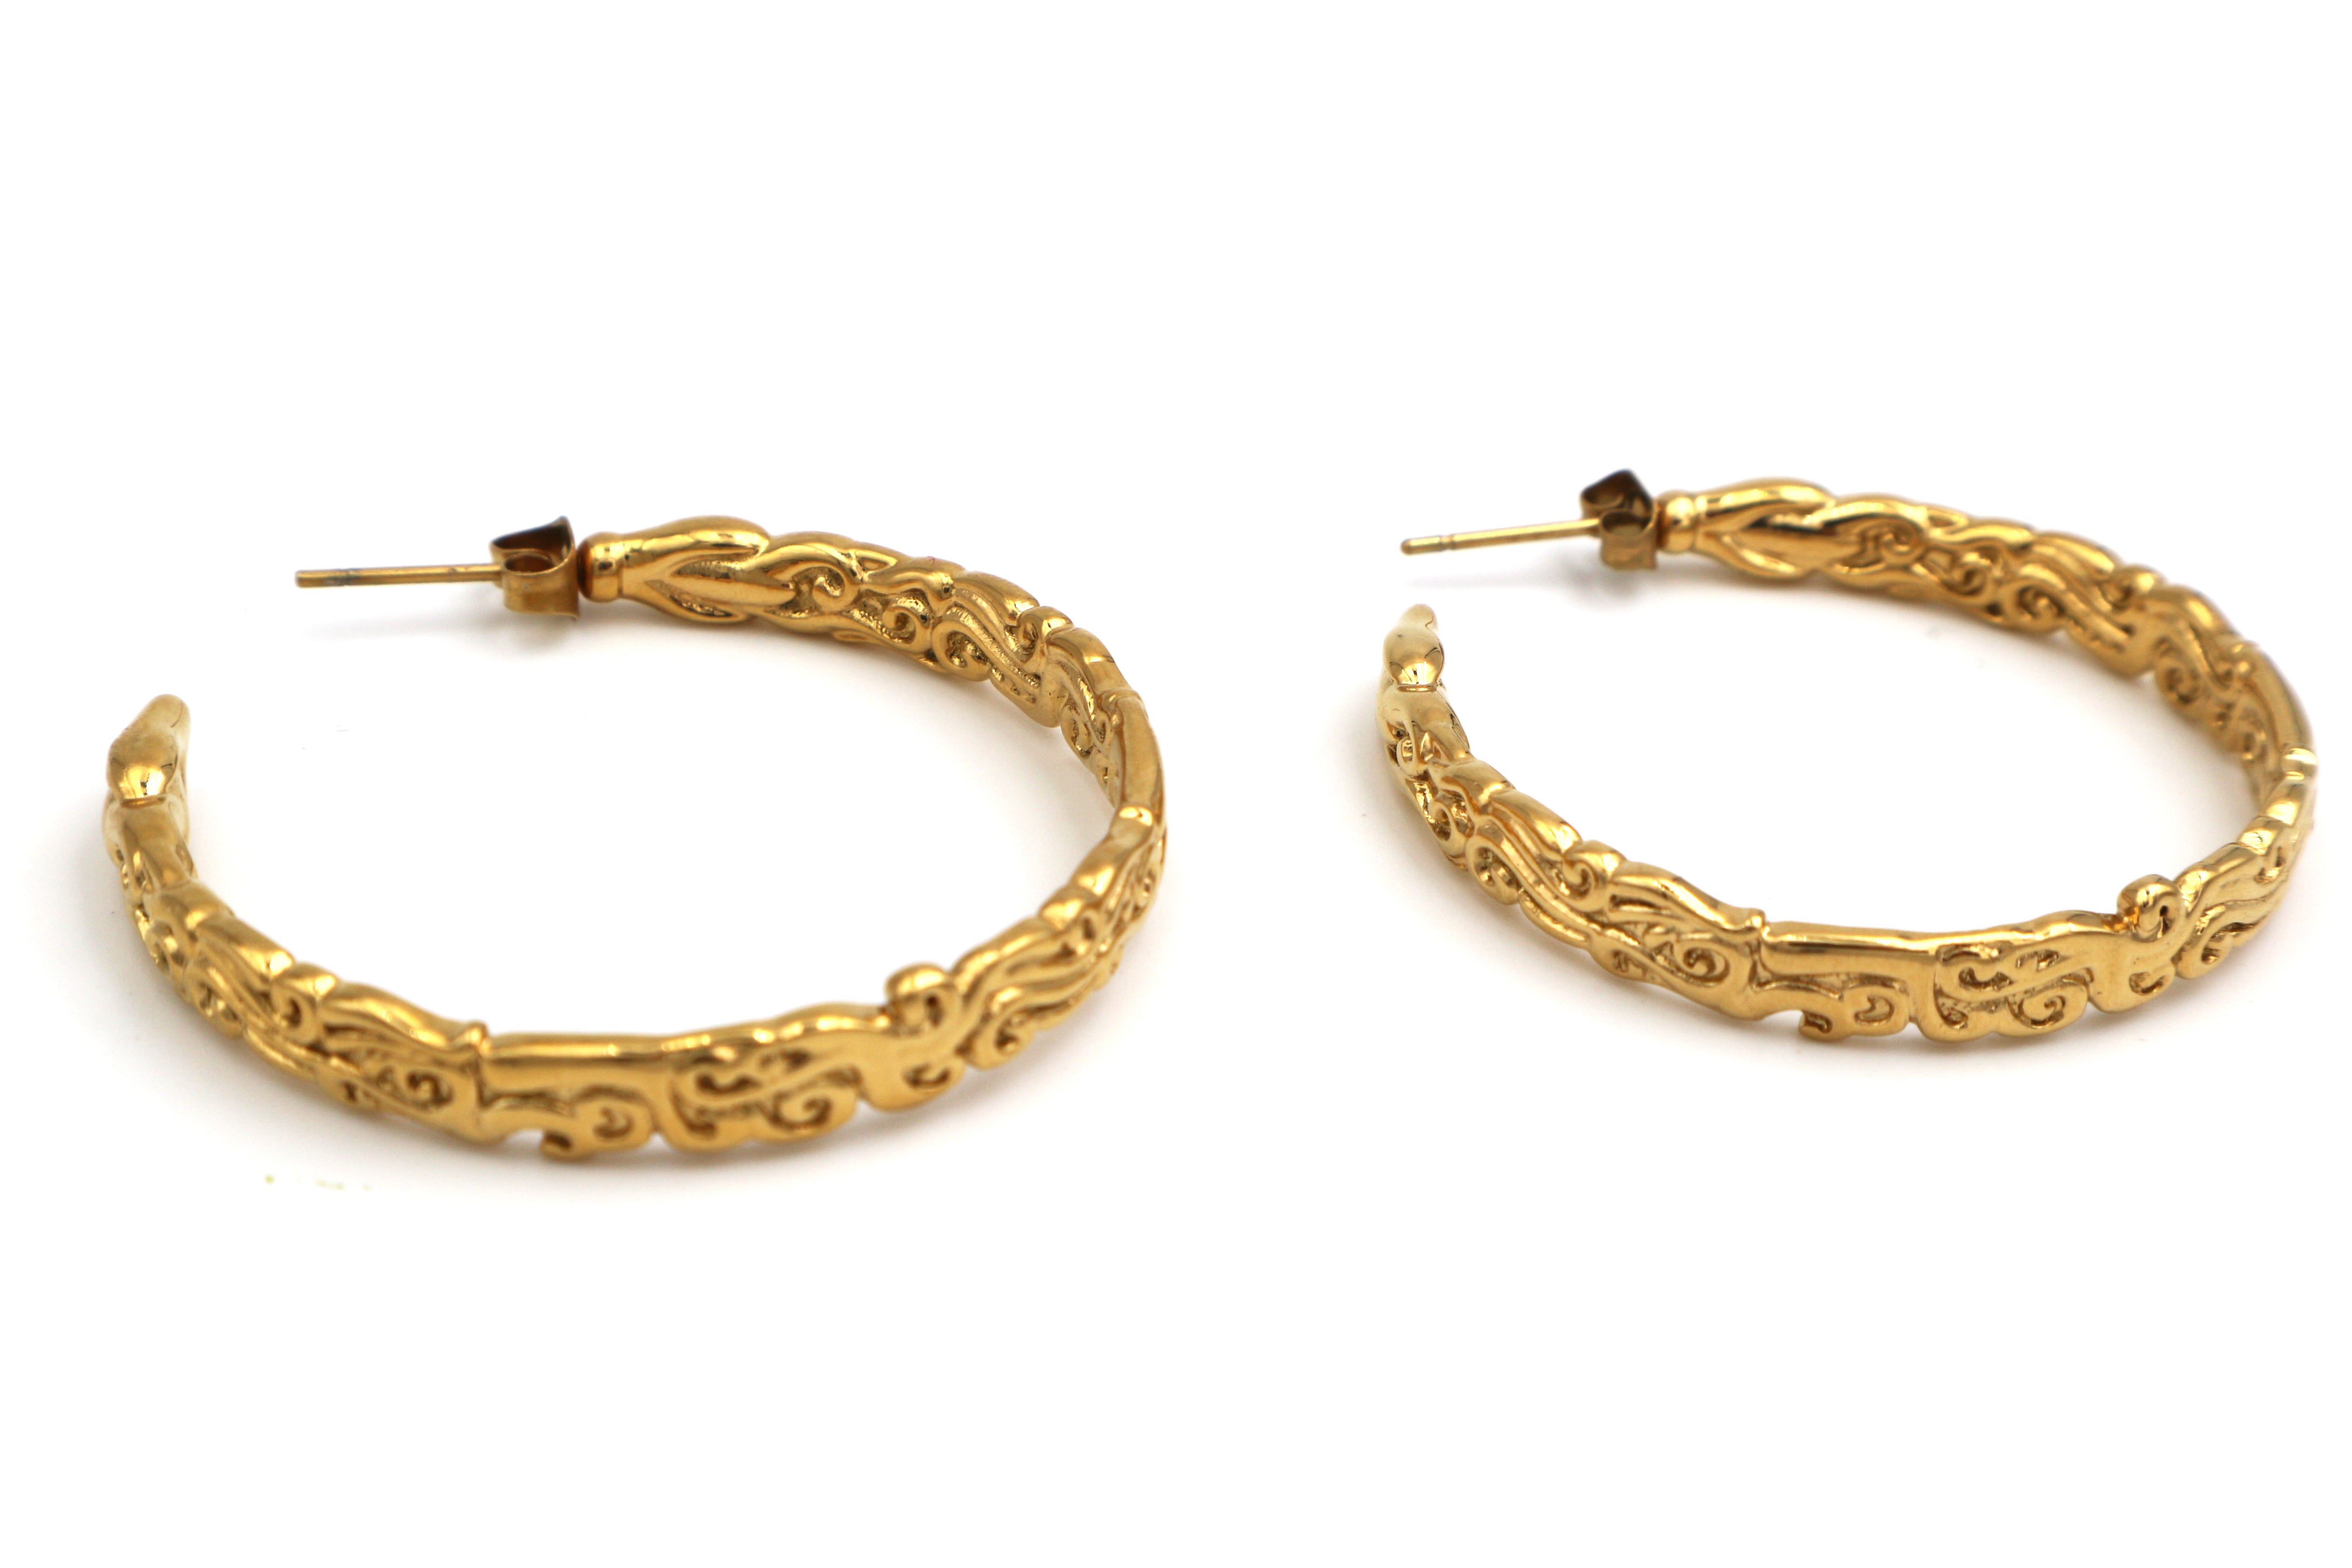 AGATHE the antique hoops